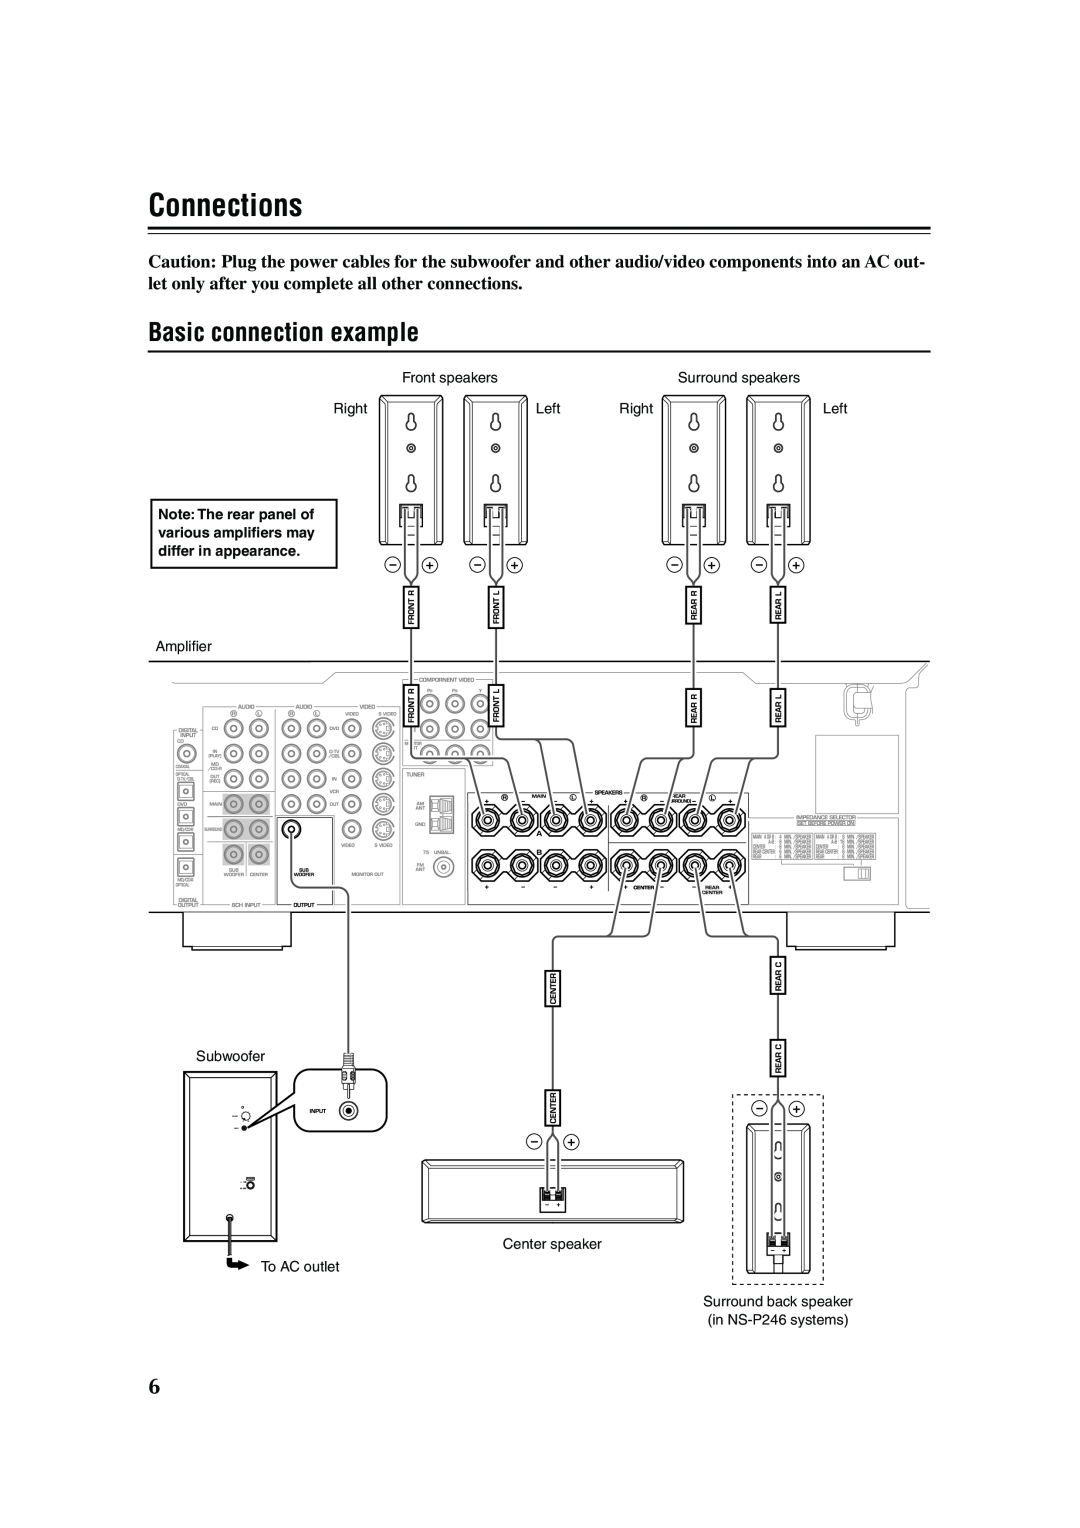 Yamaha RX-SL80 owner manual Connections, Basic connection example, Left 